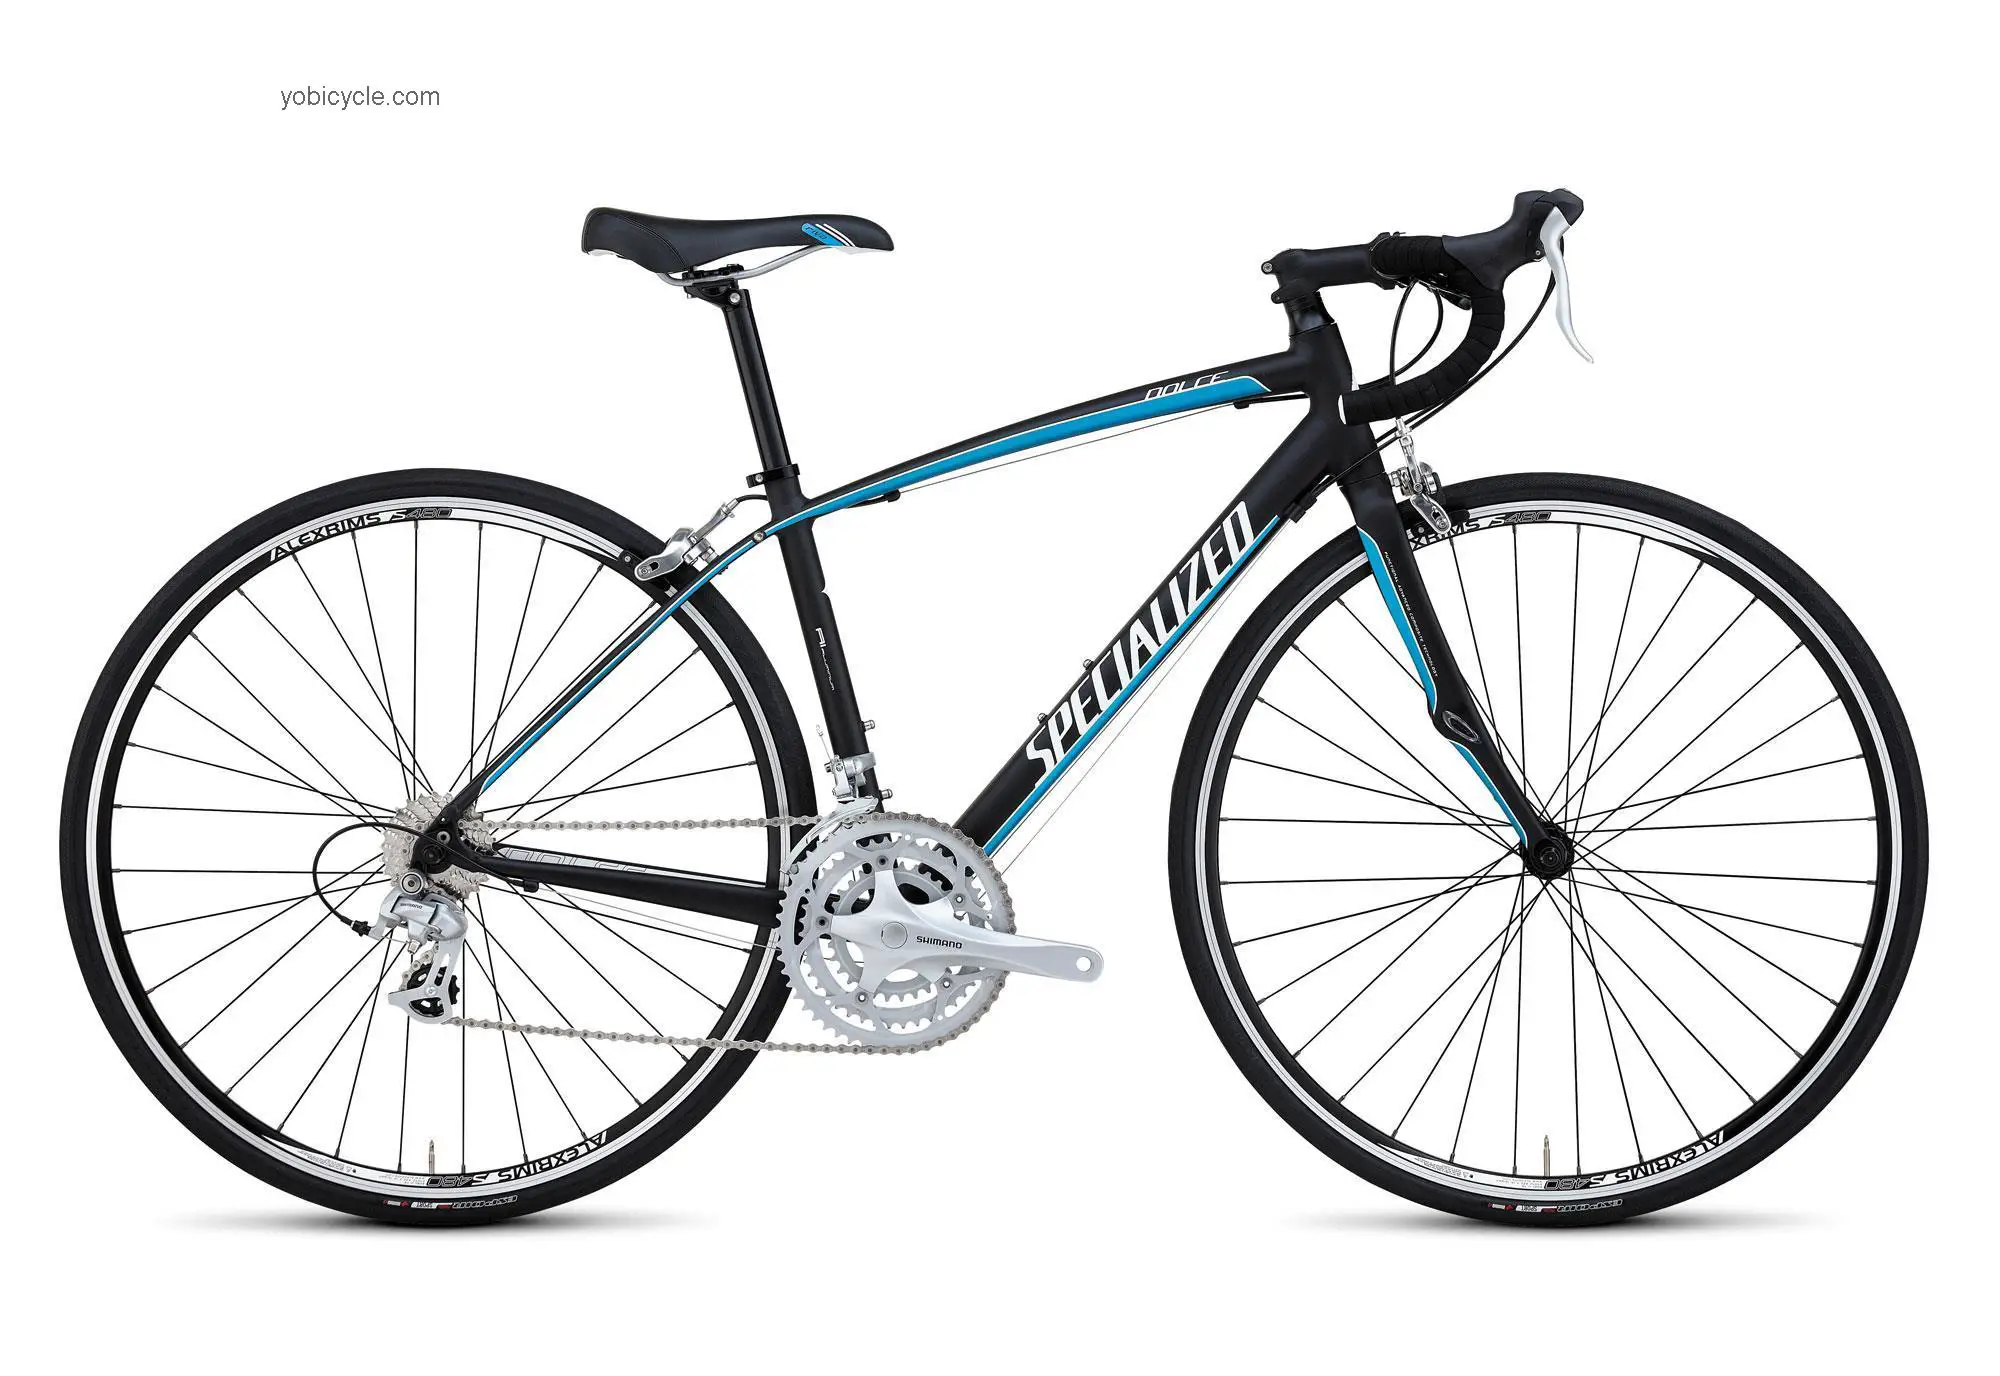 Specialized Dolce Compact 2012 comparison online with competitors